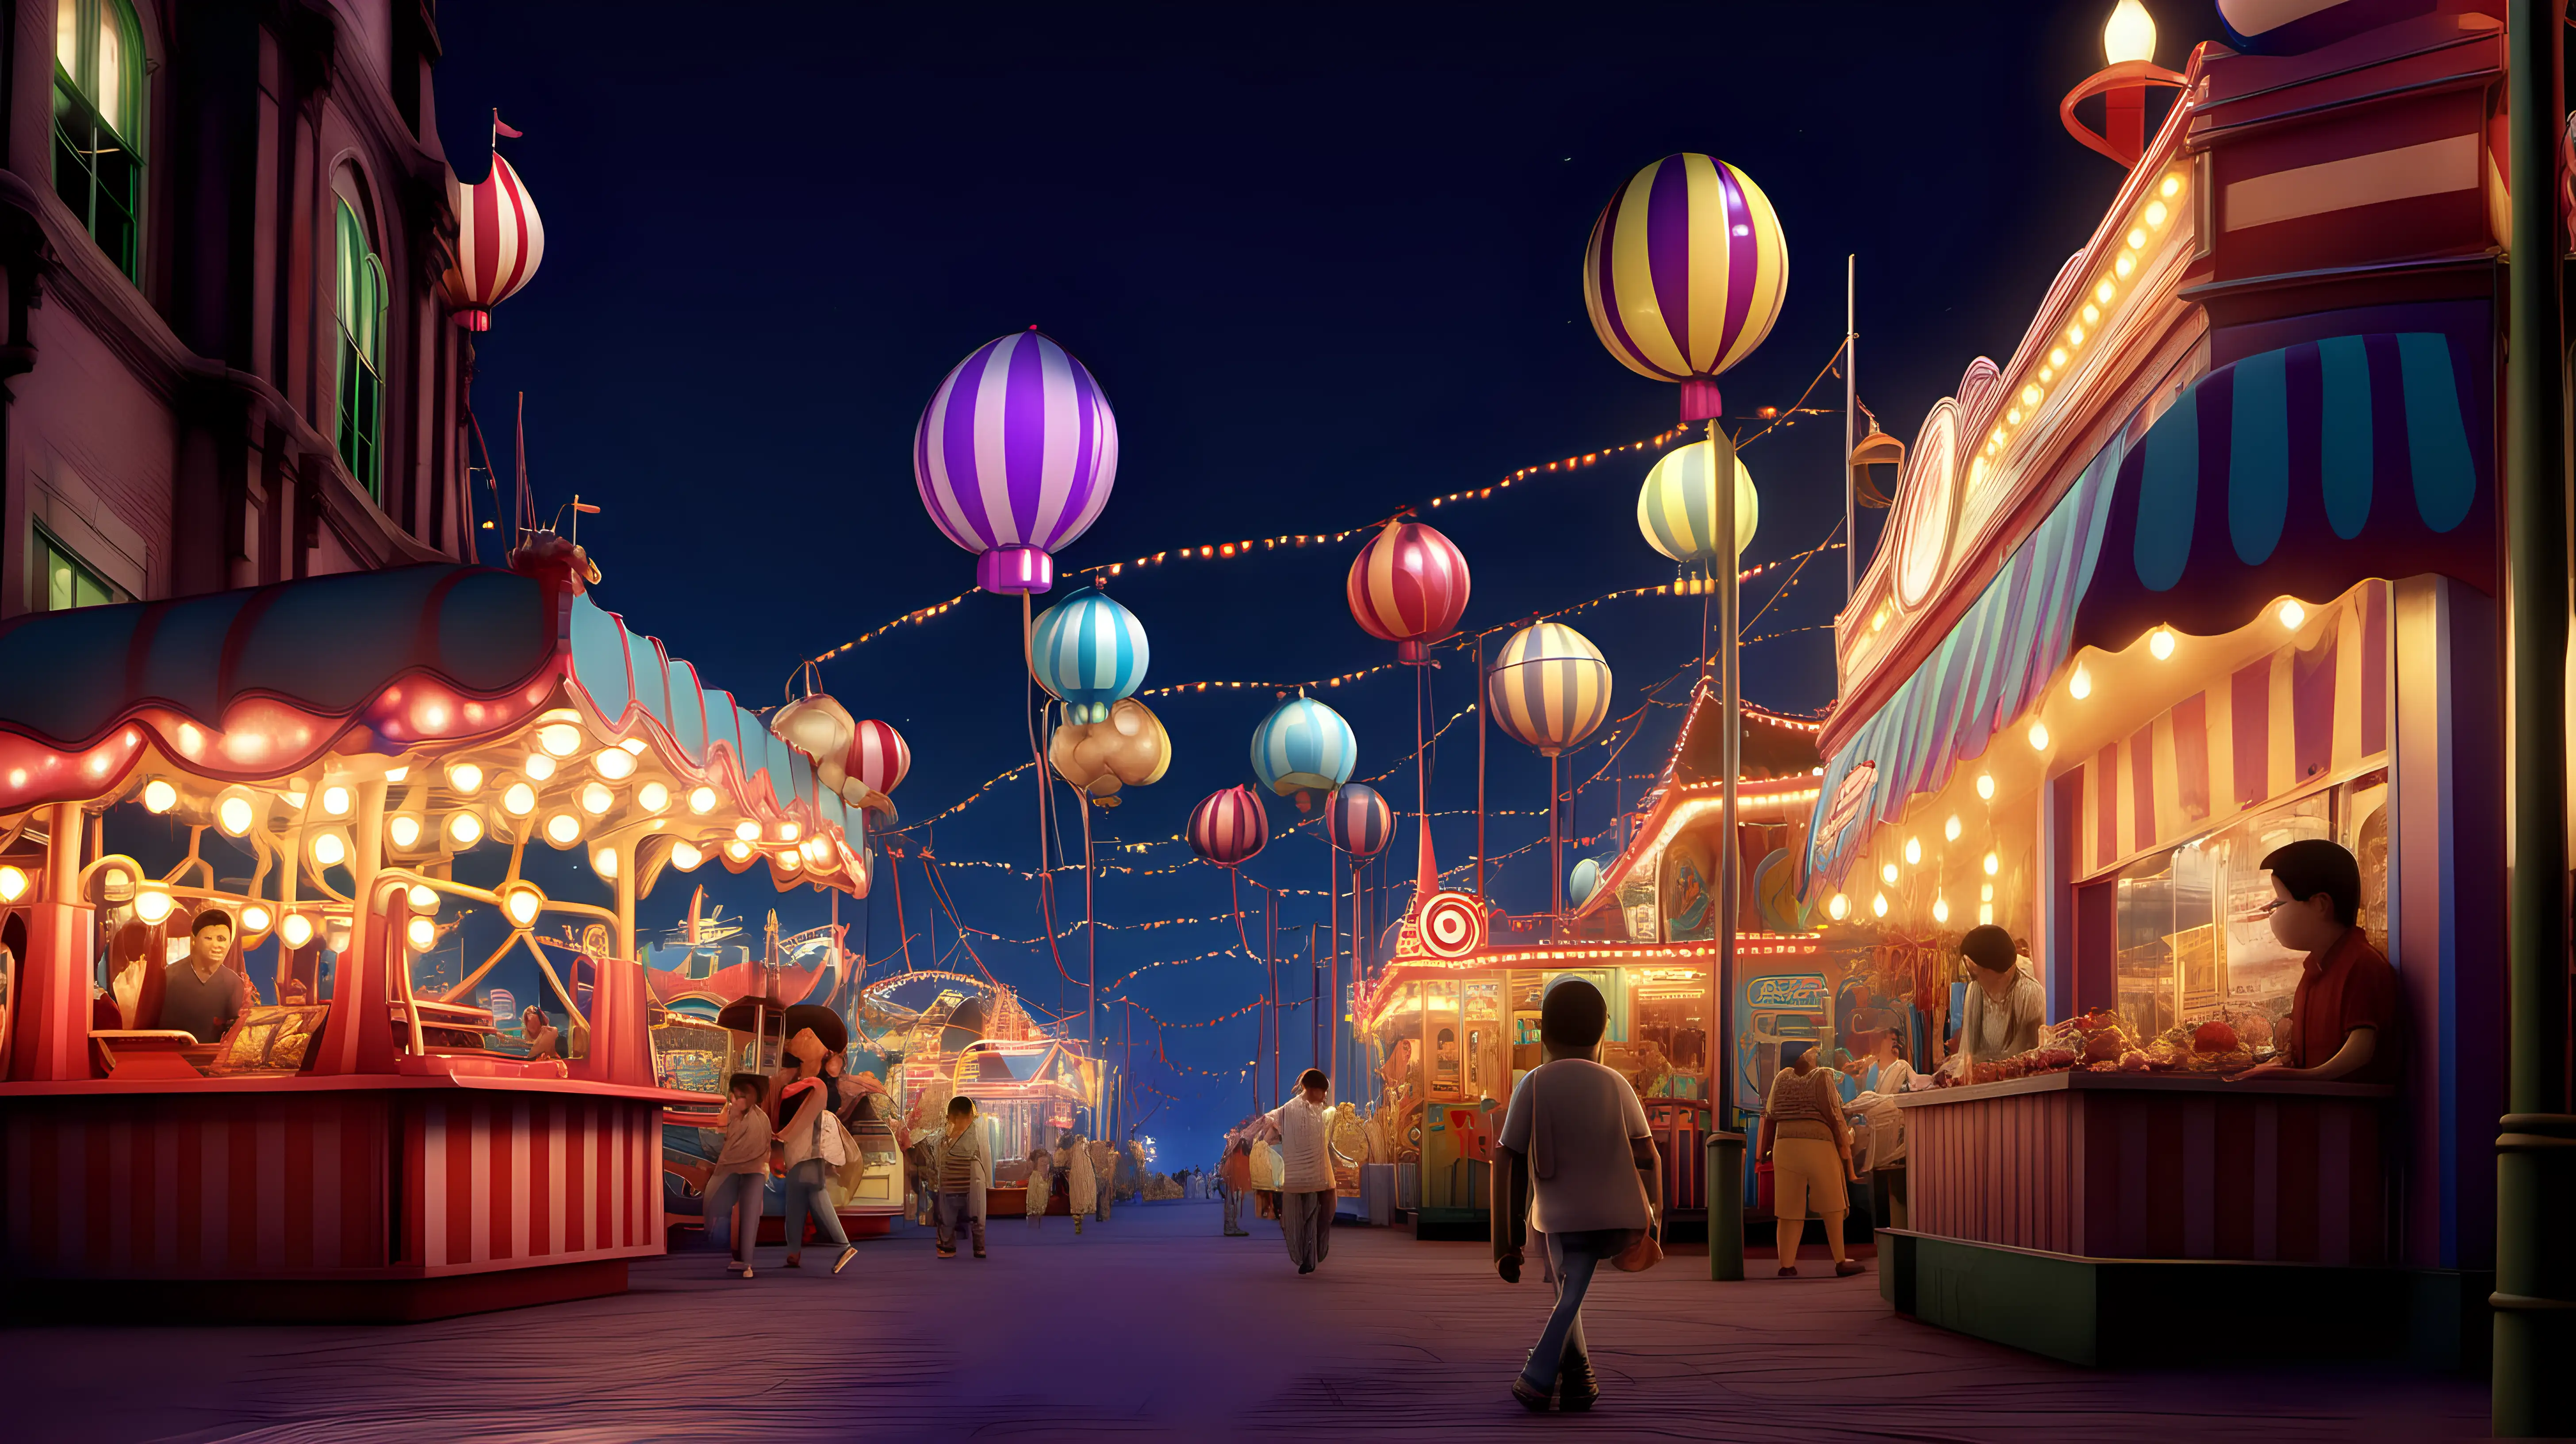 Vibrant Nightlife at Amusement Park with PixarStyle Vendors